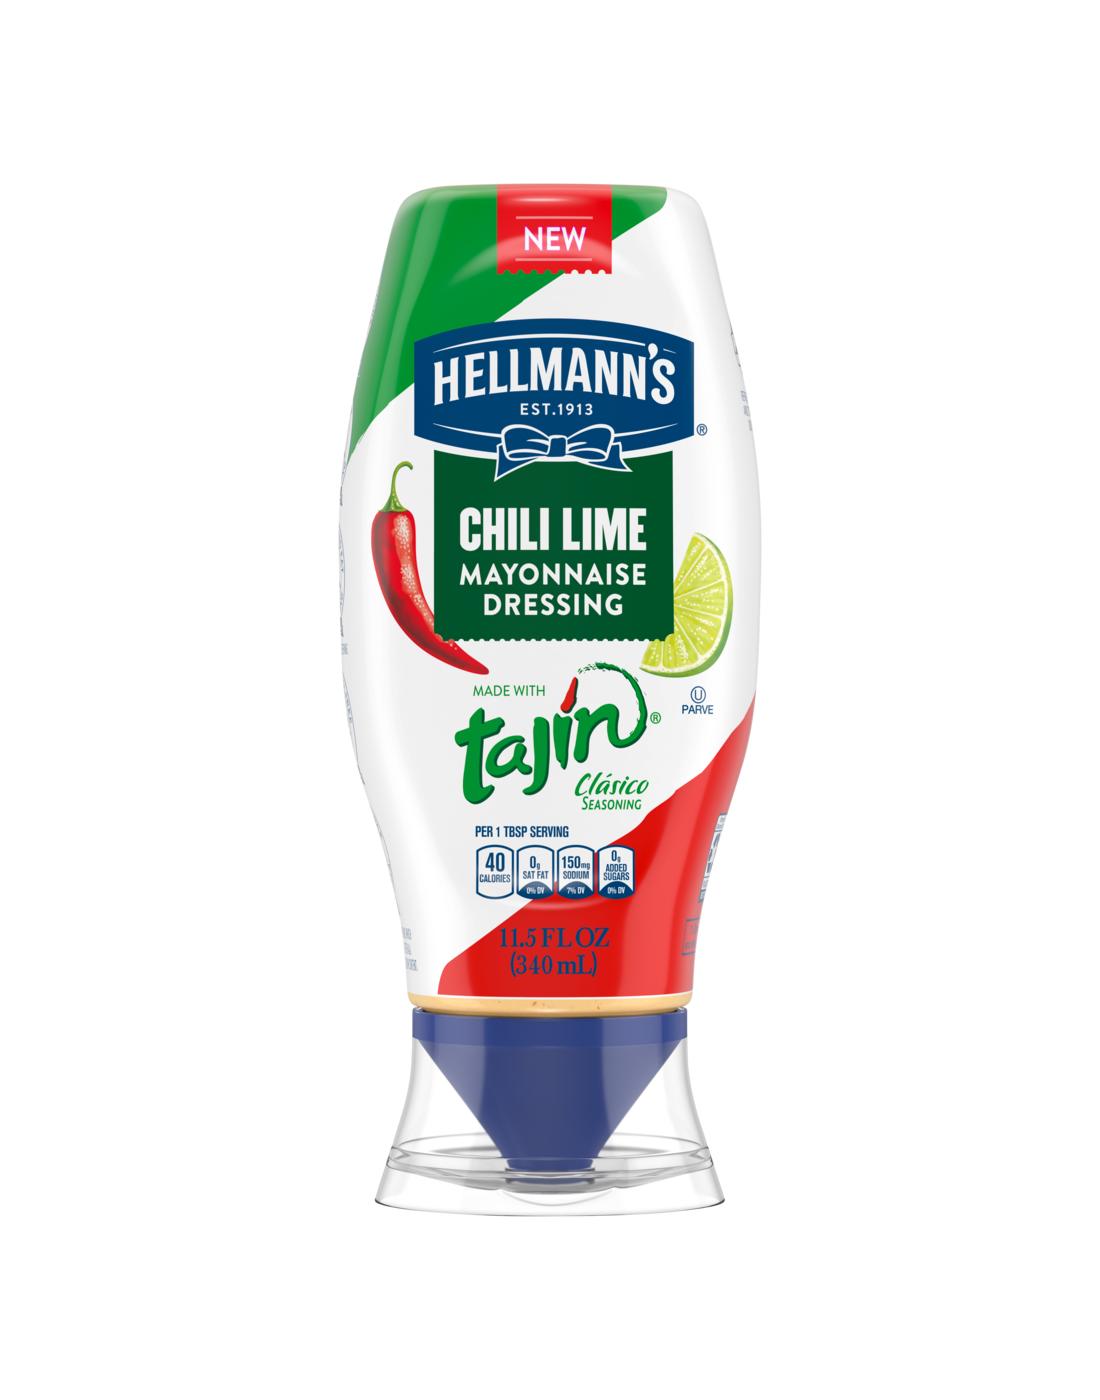 Hellmann's Tajin Chili Lime Mayonnaise Dressing Squeeze Bottle; image 1 of 2